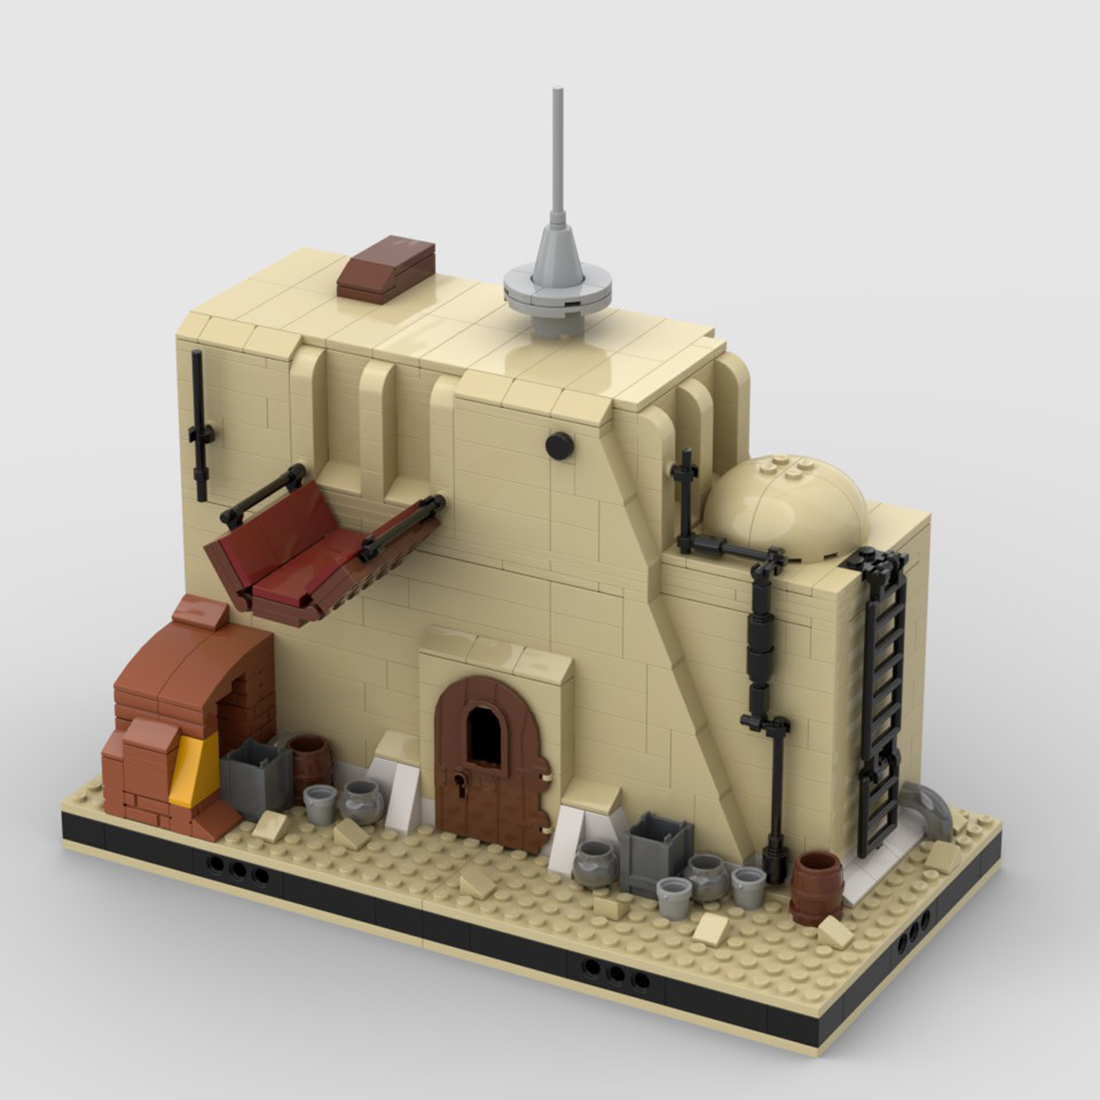 Details about   MOC SW Tatooine Single House Building Star Hometown Model Assemble Kid Gift toys 